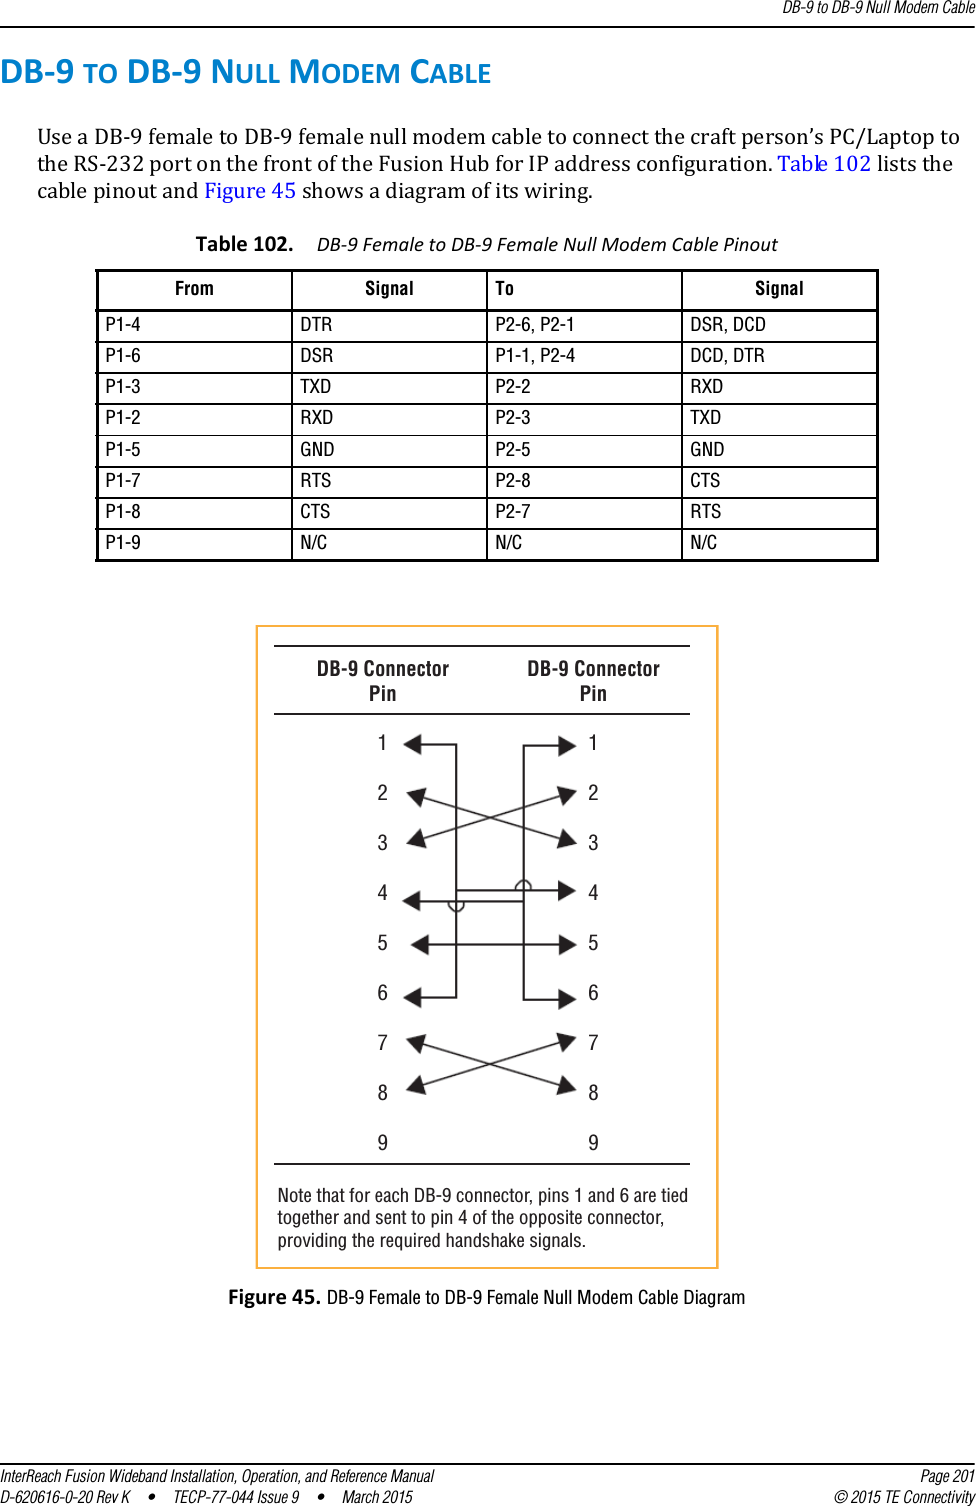 DB-9 to DB-9 Null Modem CableInterReach Fusion Wideband Installation, Operation, and Reference Manual Page 201D-620616-0-20 Rev K  •  TECP-77-044 Issue 9  •  March 2015 © 2015 TE ConnectivityDB-9 TO DB-9 NULL MODEM CABLEUse a DB-9 female to DB-9 female null modem cable to connect the craft person’s PC/Laptop to the RS-232 port on the front of the Fusion Hub for IP address configuration. Table 102 lists the cable pinout and Figure 45 shows a diagram of its wiring.Figure 45. DB-9 Female to DB-9 Female Null Modem Cable DiagramTable 102. DB-9 Female to DB-9 Female Null Modem Cable PinoutFrom Signal To SignalP1-4 DTR P2-6, P2-1 DSR, DCD P1-6 DSR P1-1, P2-4 DCD, DTR P1-3 TXD P2-2 RXD P1-2 RXD P2-3 TXD P1-5 GND P2-5 GND P1-7 RTS P2-8 CTS P1-8 CTS P2-7 RTSP1-9 N/C N/C N/CDB-9 ConnectorPinDB-9 ConnectorPin123456789123456789Note that for each DB-9 connector, pins 1 and 6 are tiedtogether and sent to pin 4 of the opposite connector,providing the required handshake signals.